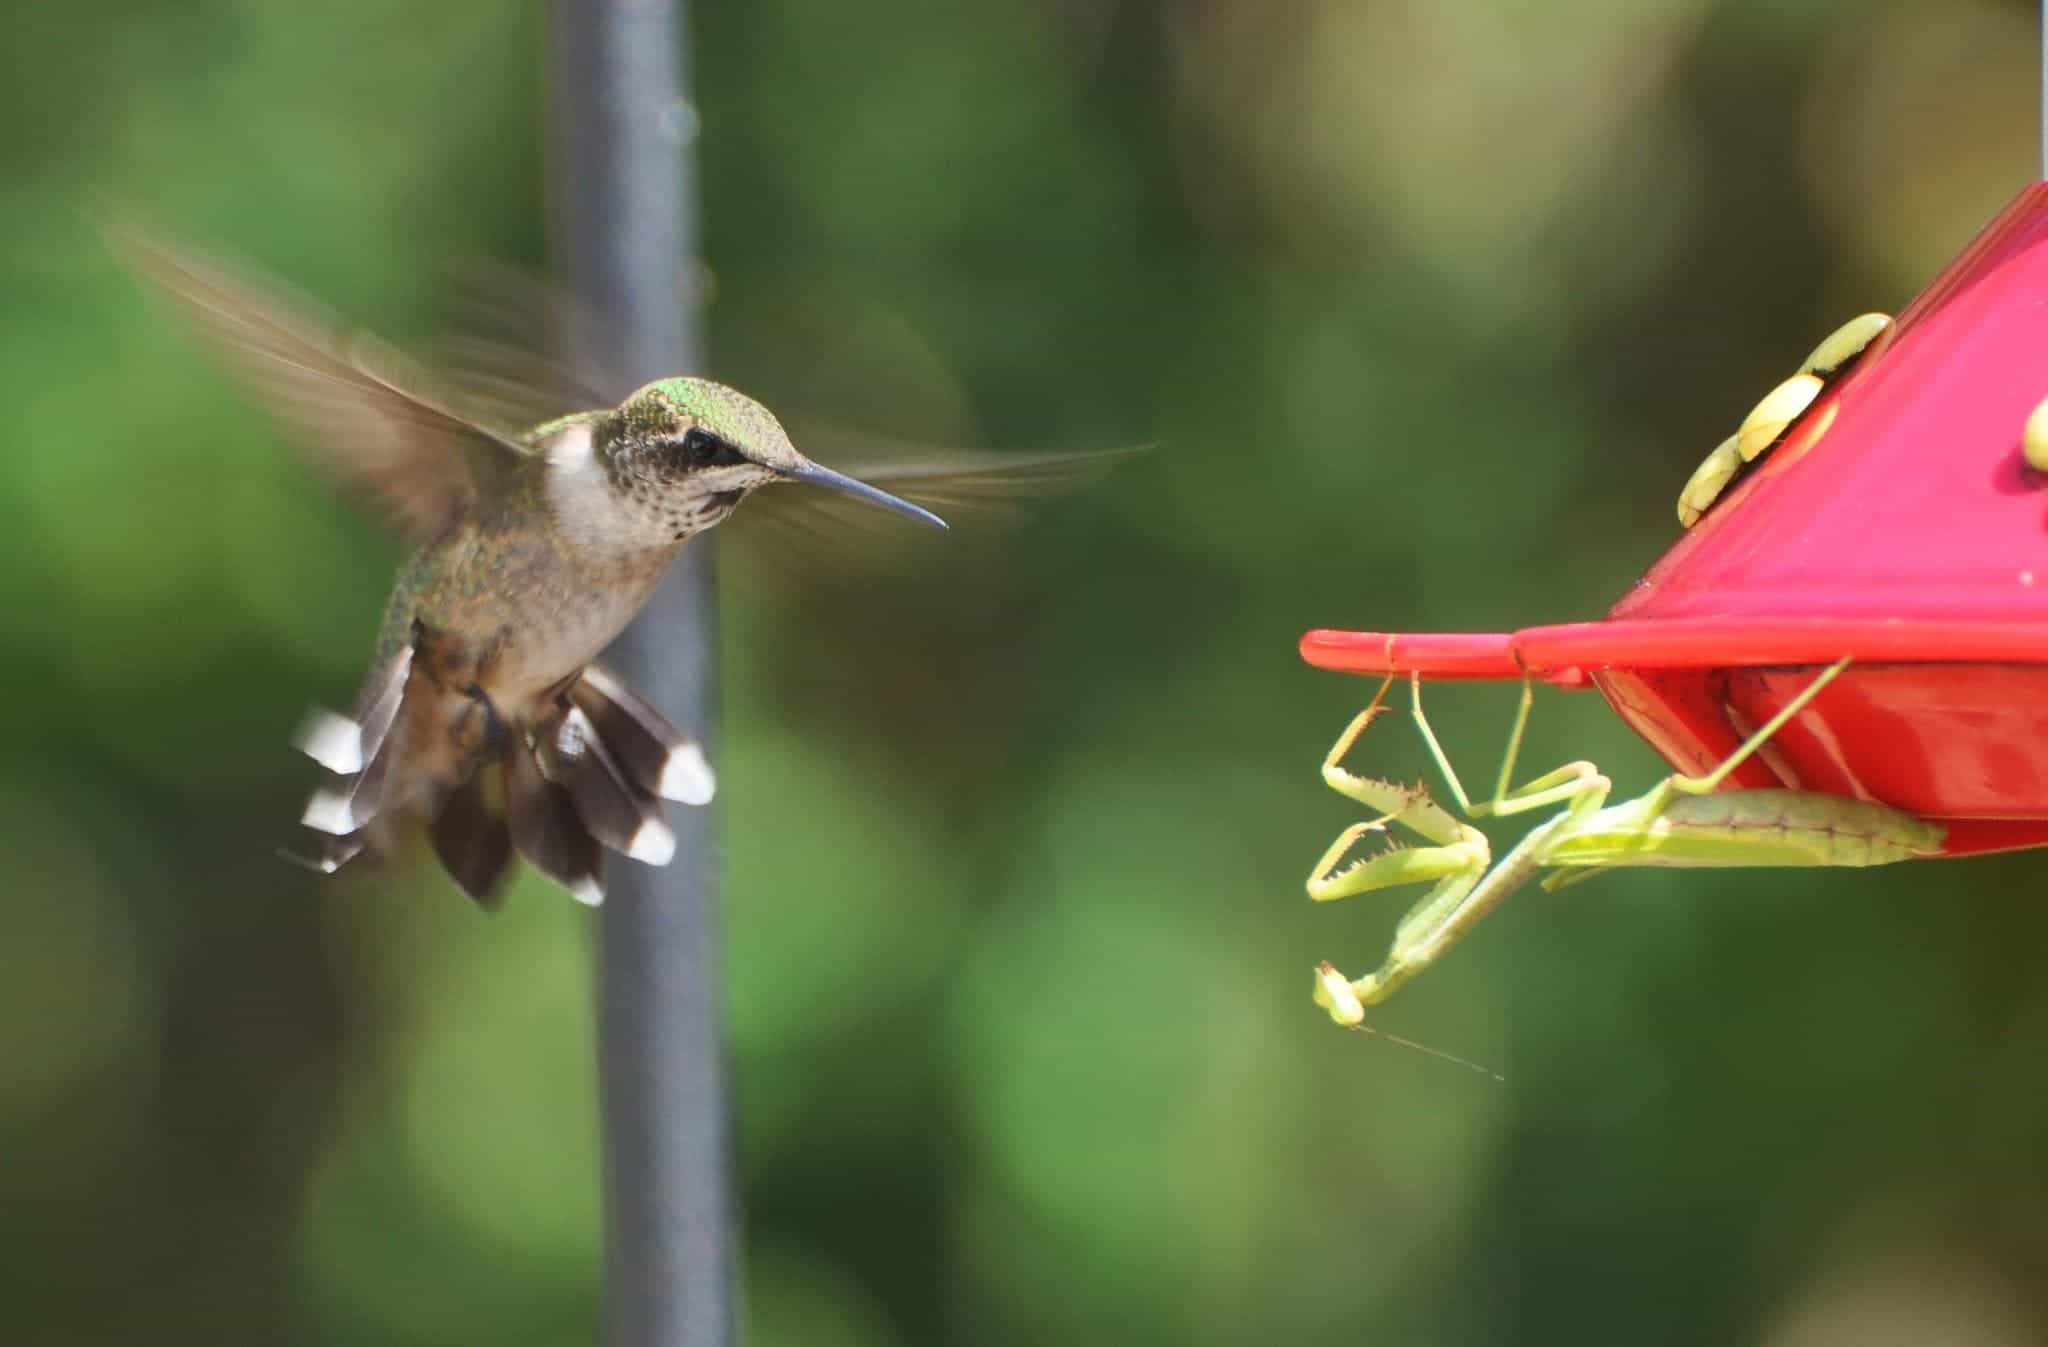 Watch out, hummingbird! Image credits: Face Off!